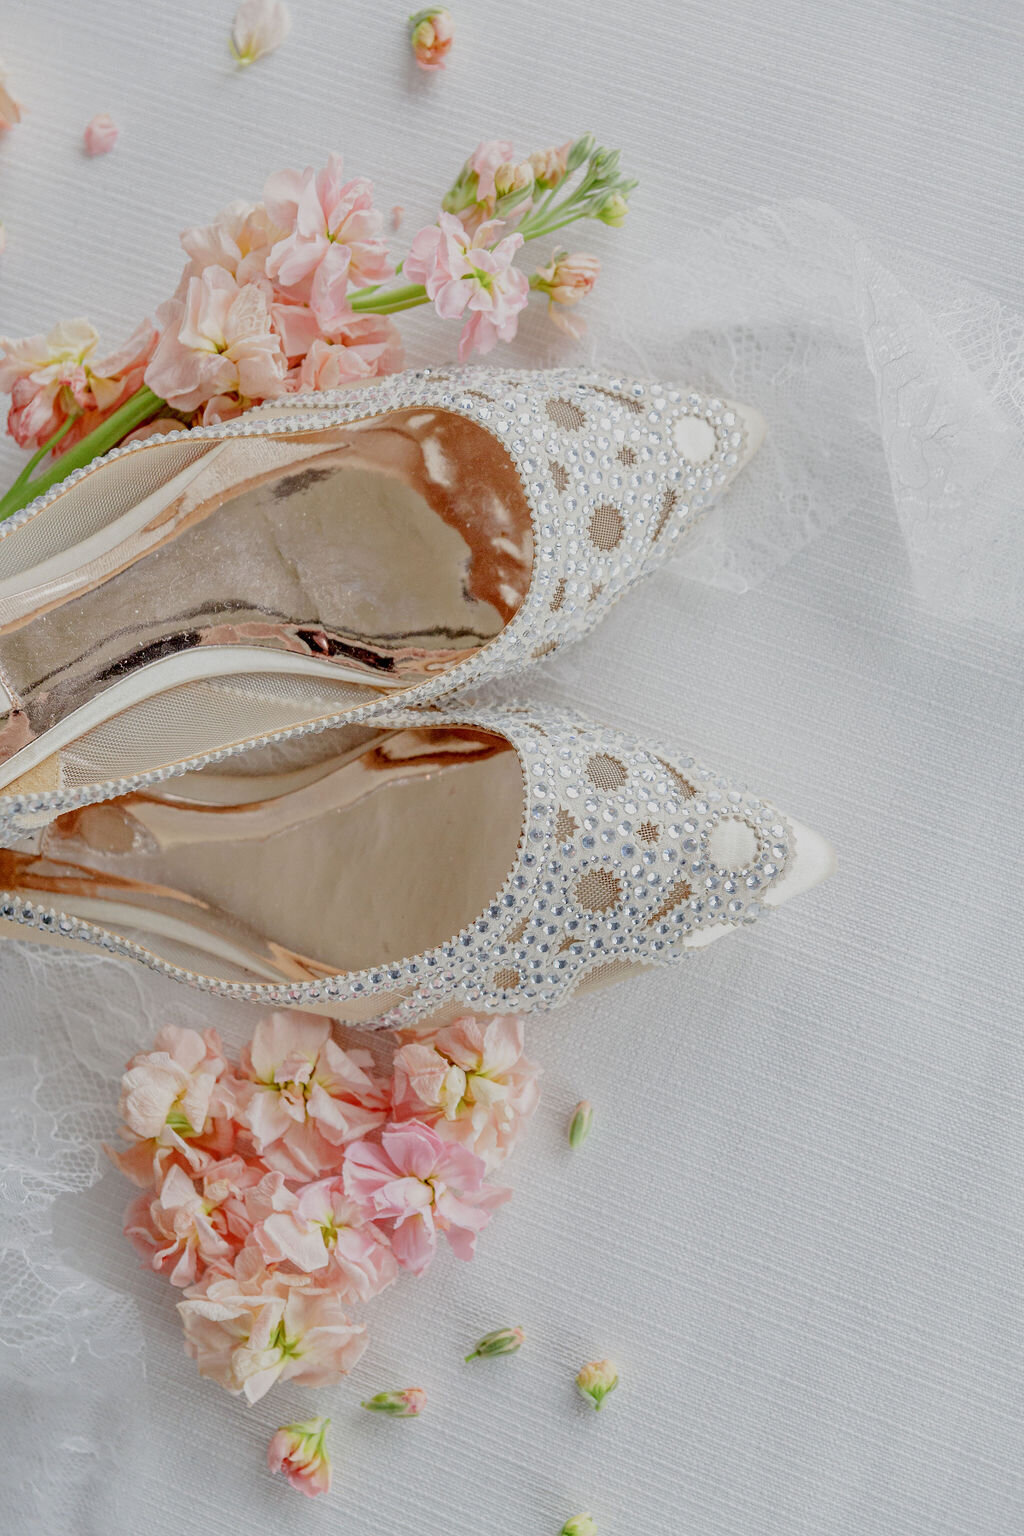 An artistic shot focusing on the bride's shoes with her holding up her dress, highlighting details of her wedding attire